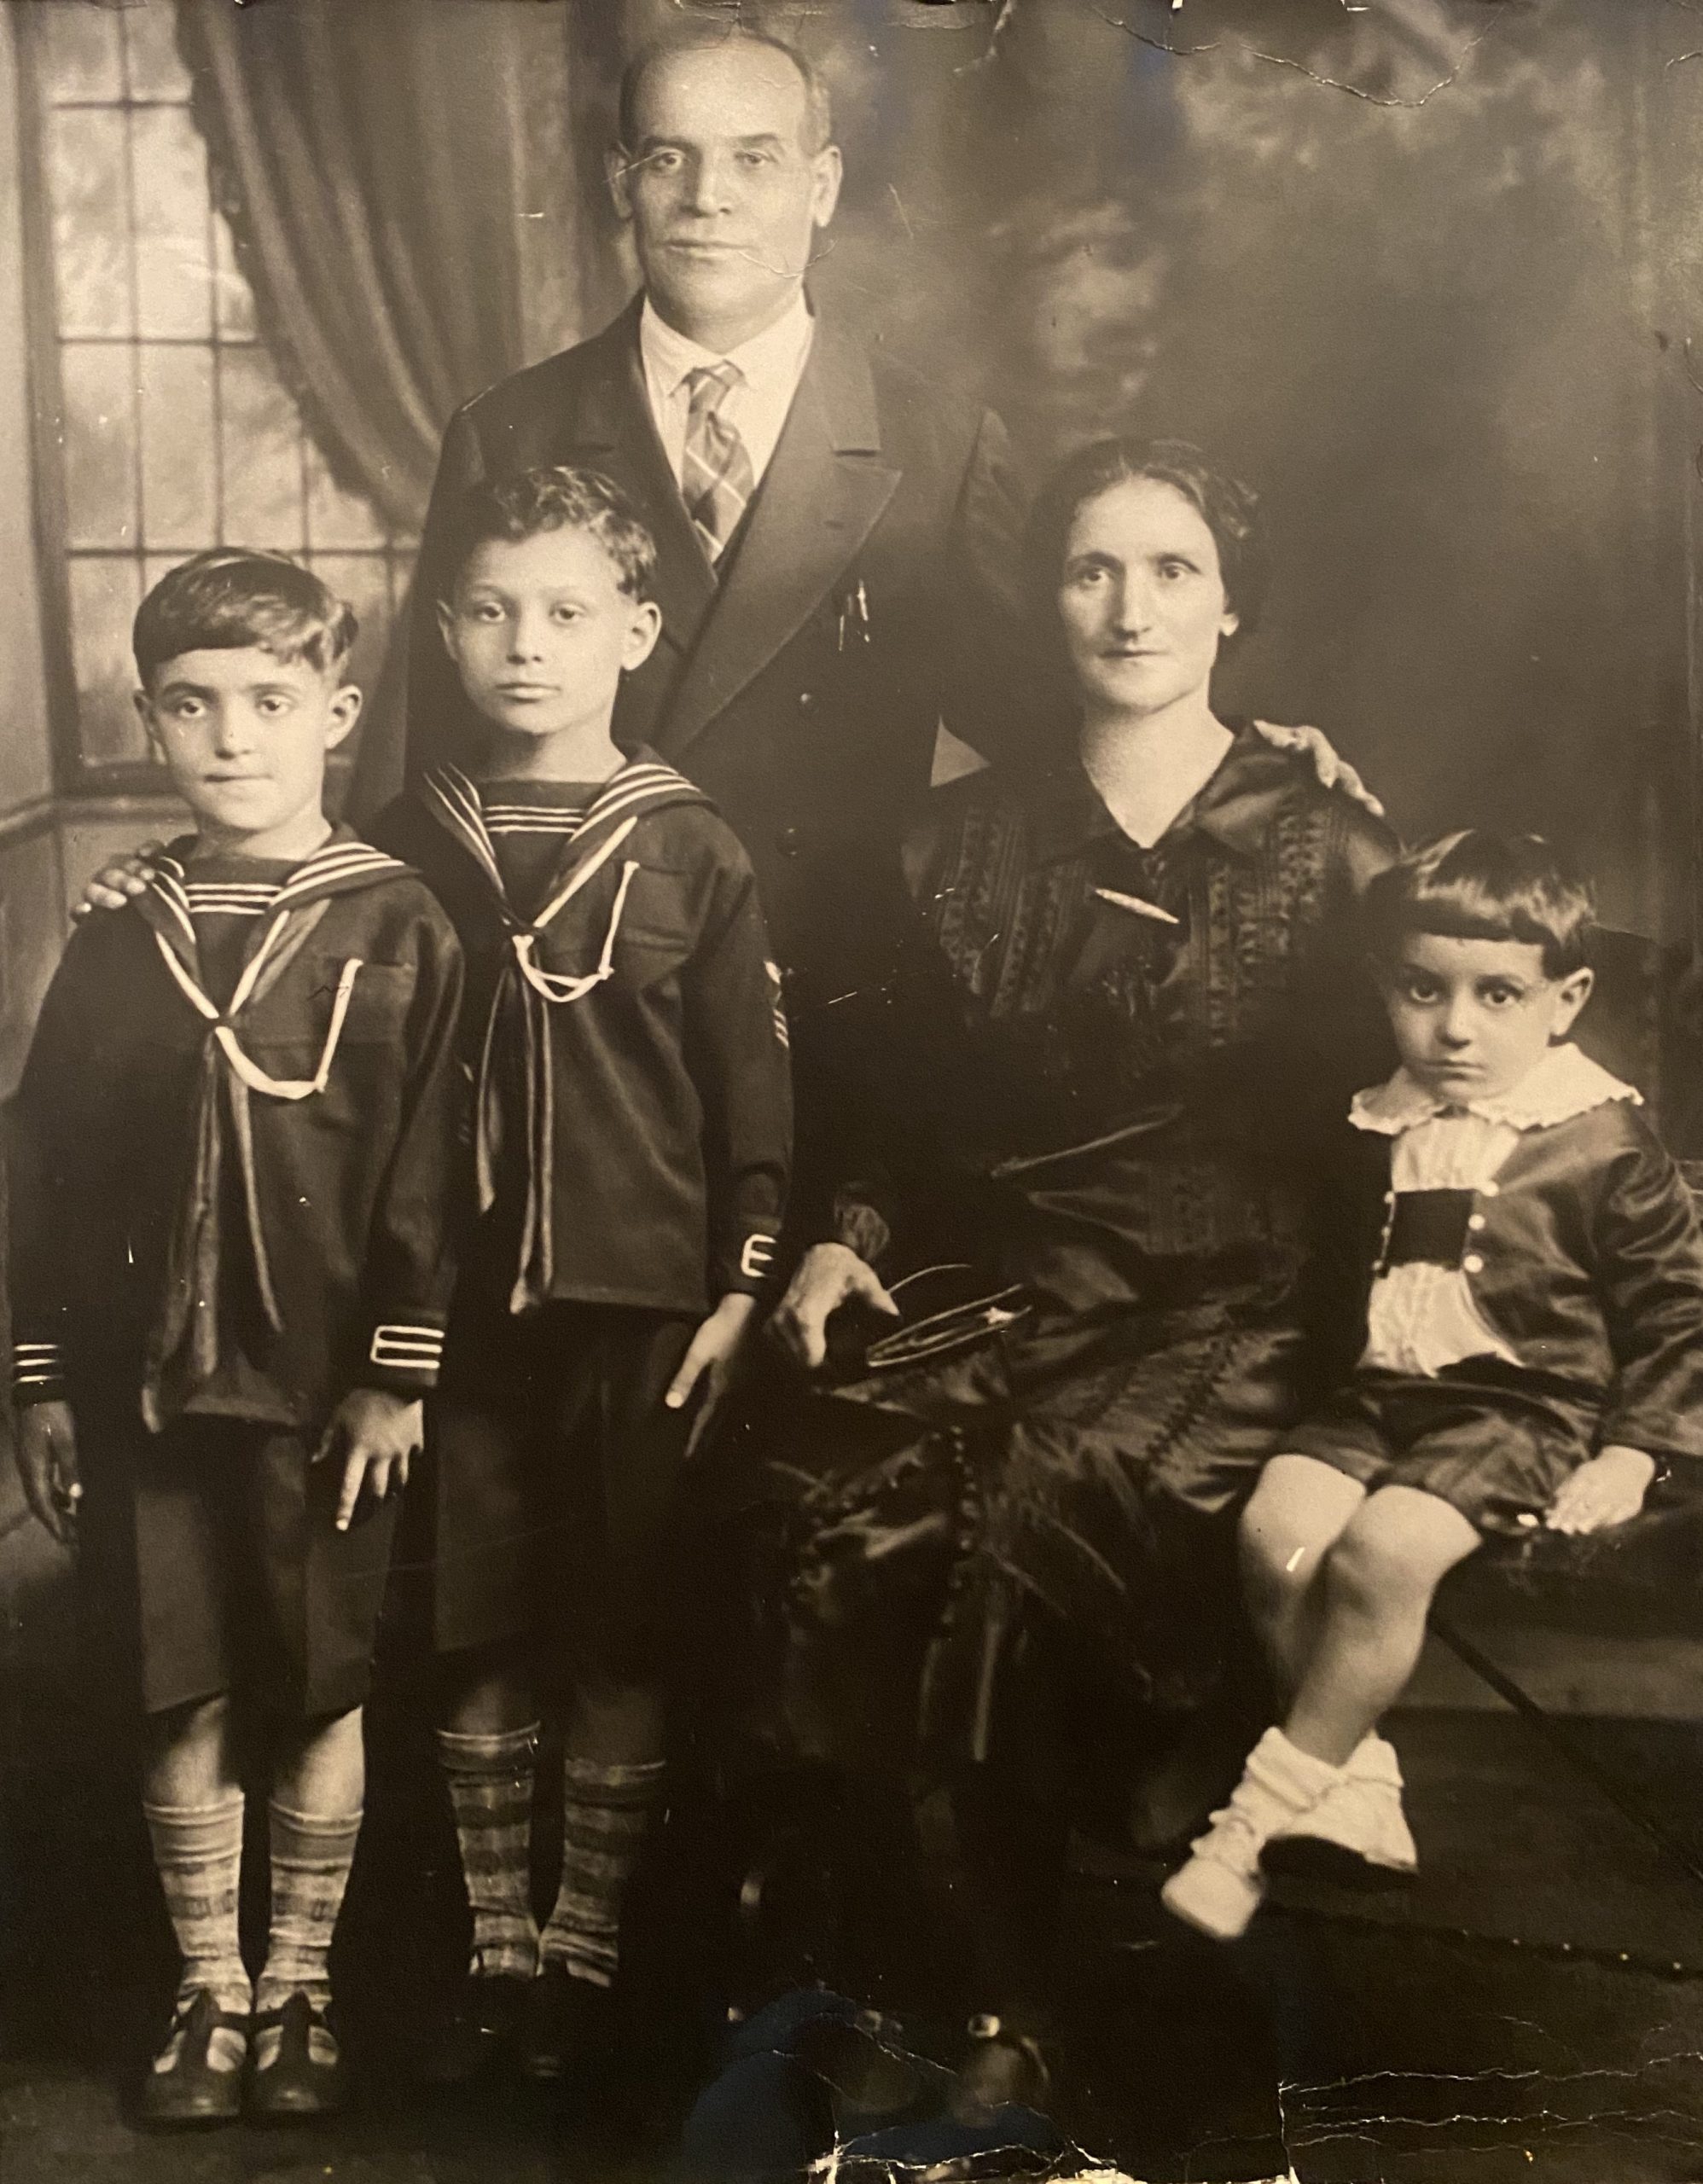 Image of the host's grandparents and children, circa 1928